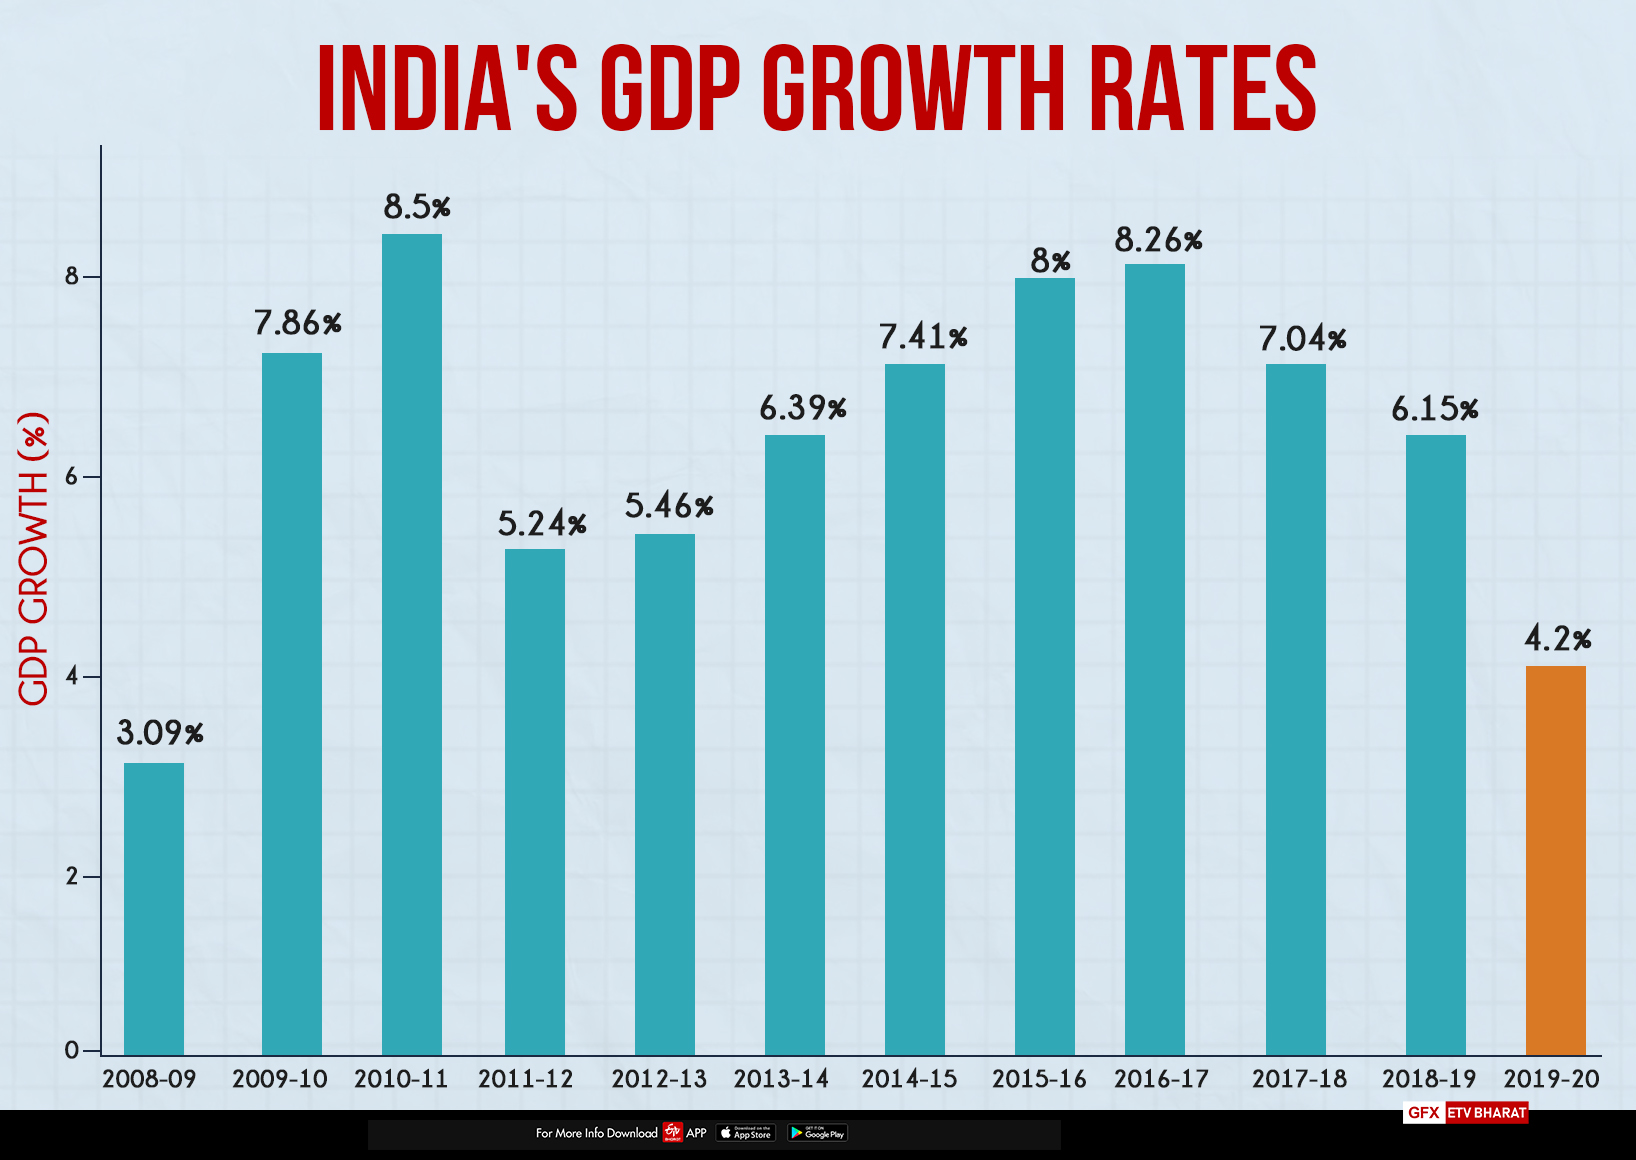 Prof Kaushik Basu said that India’s sharp slowdown had begun two years before the pandemic and the way the lockdown was executed has given a further downward jolt to the economy.